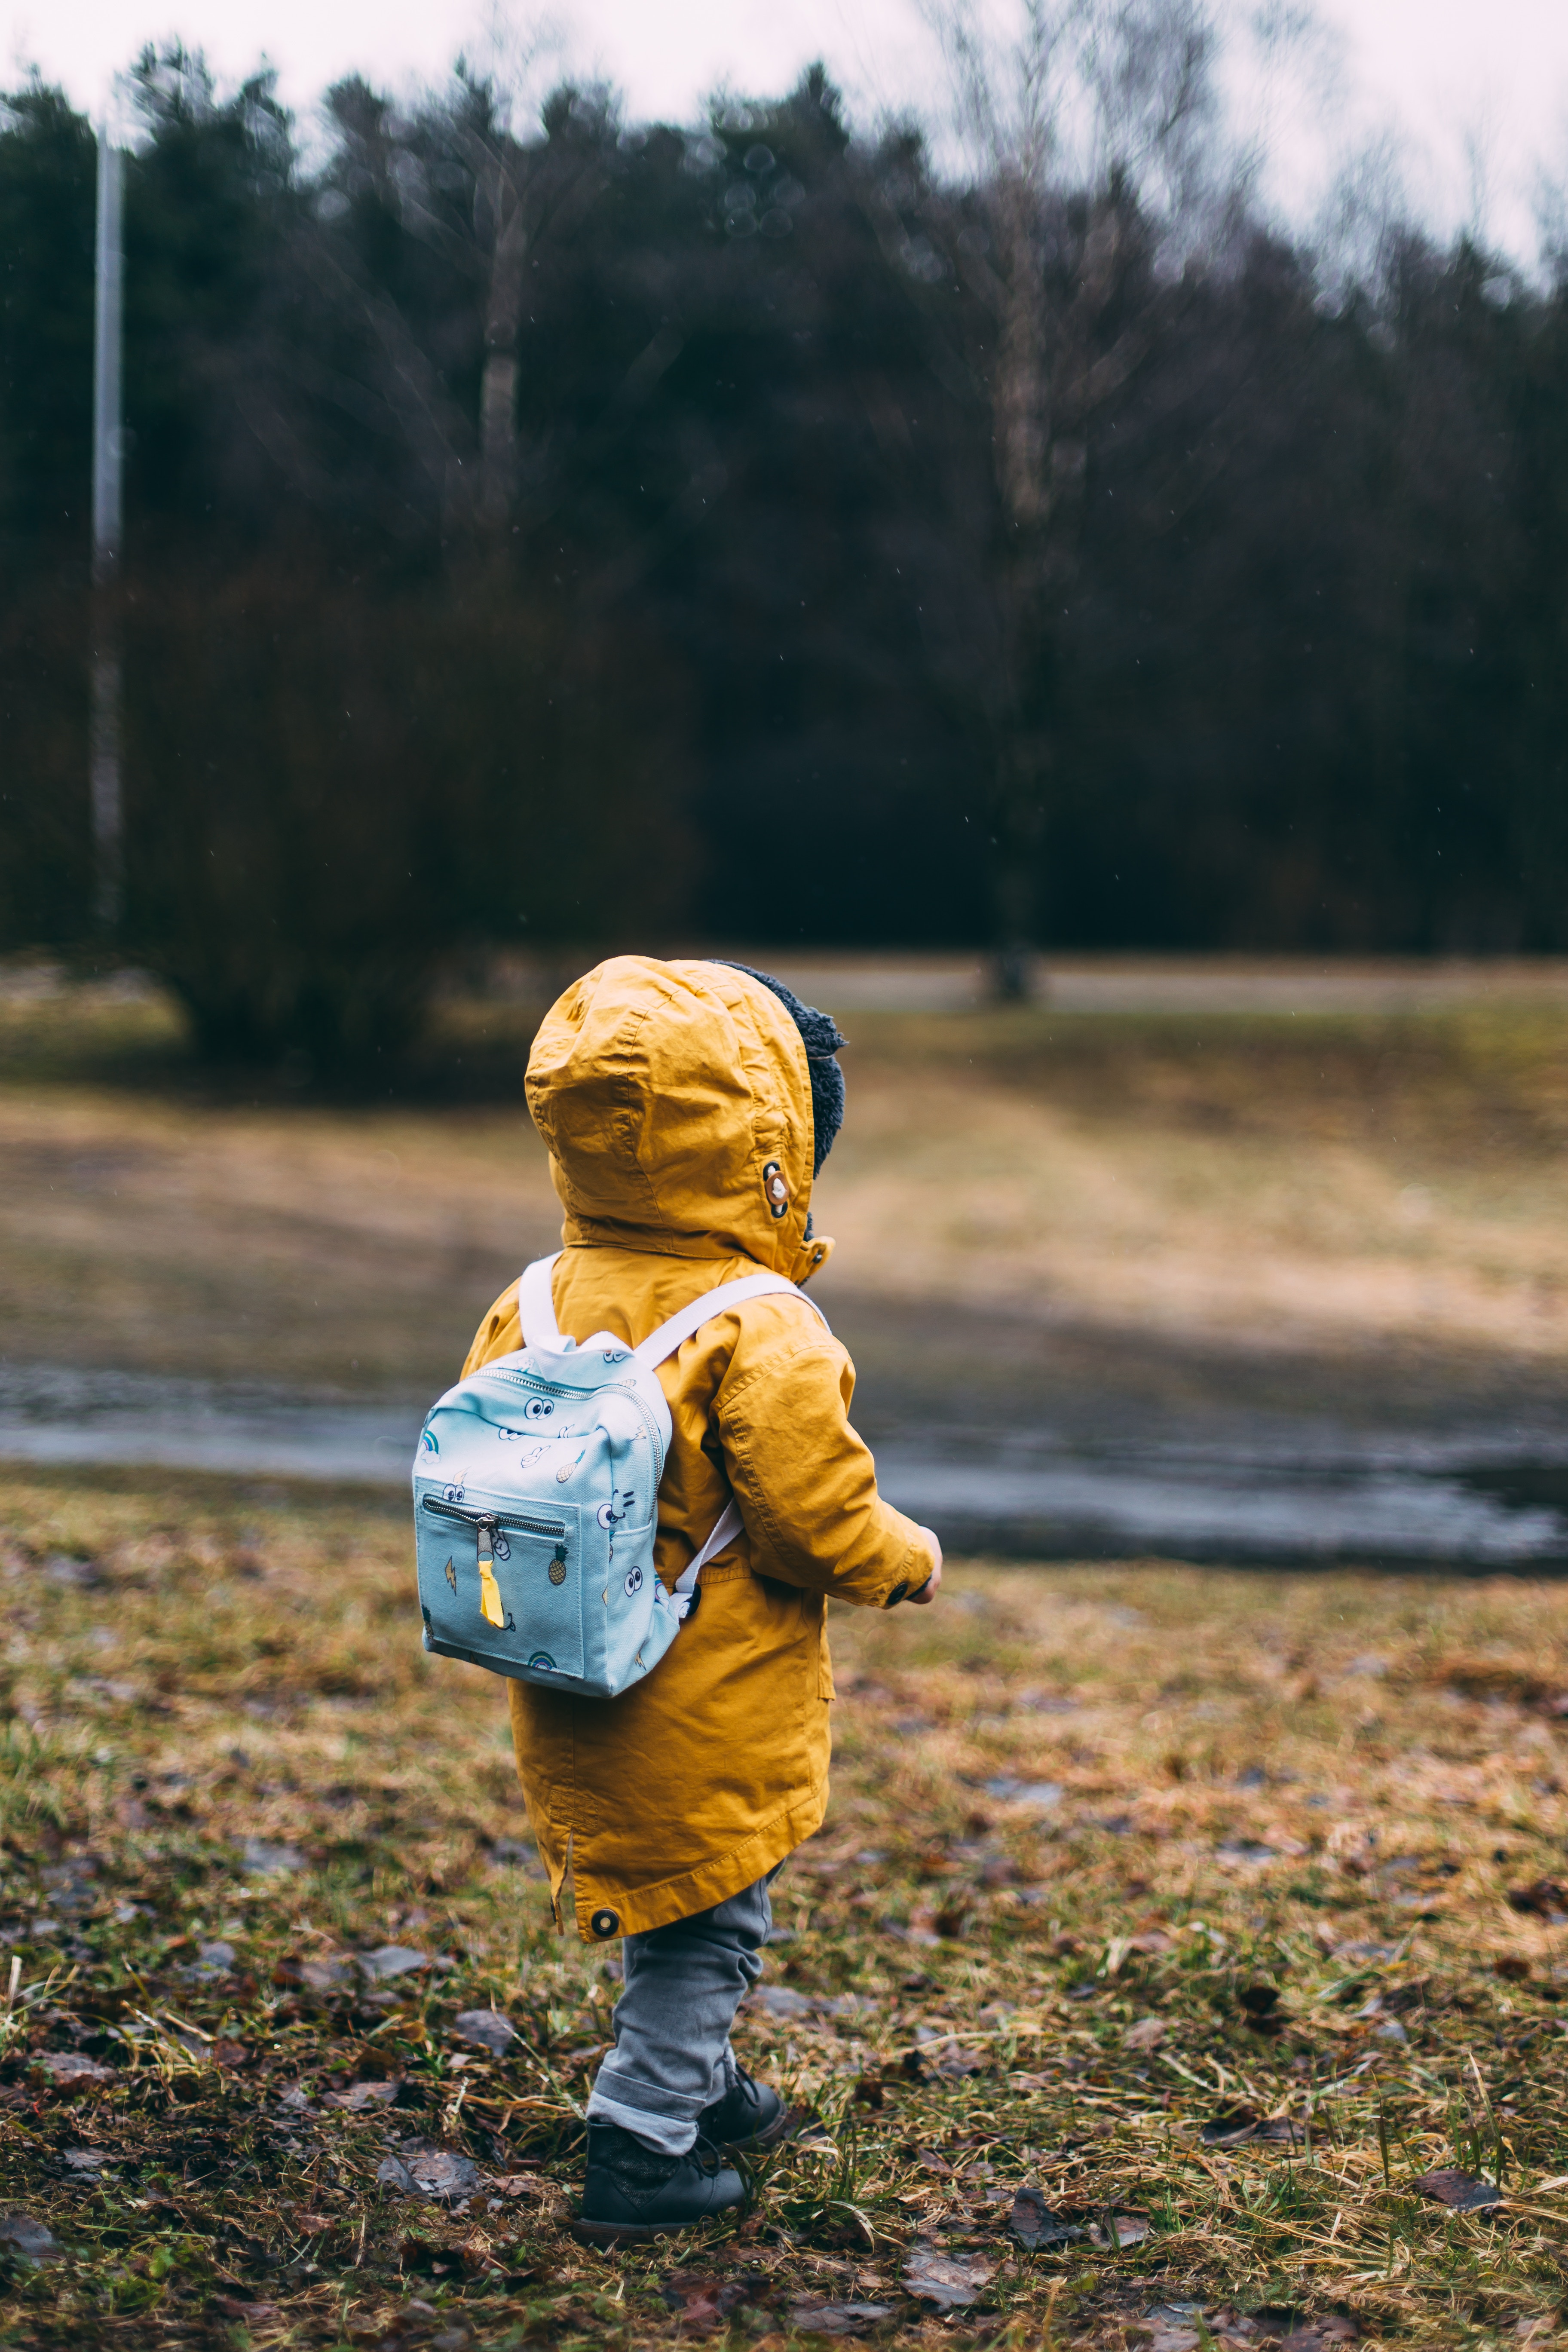 wallpapers child, miscellaneous, autumn, miscellanea, stroll, backpack, rucksack